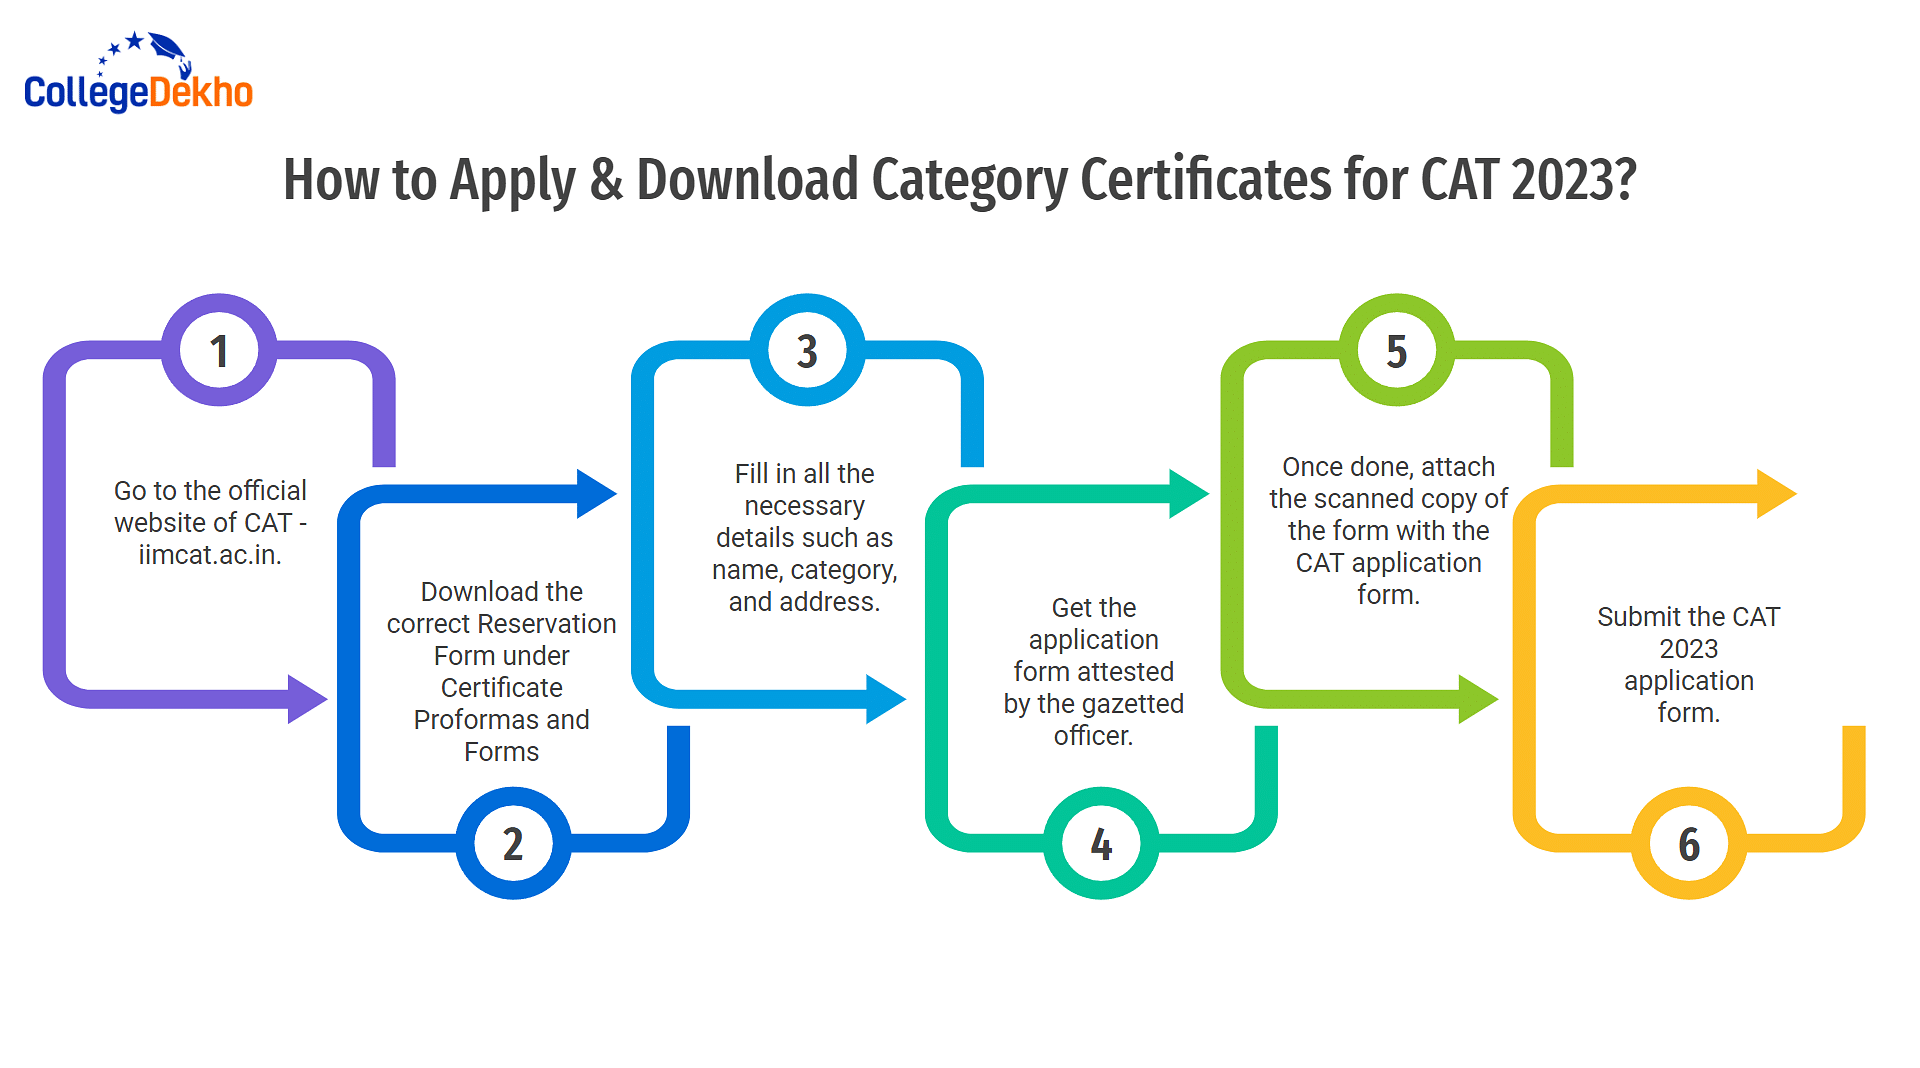 How to Apply & Download Category Certificate for CAT